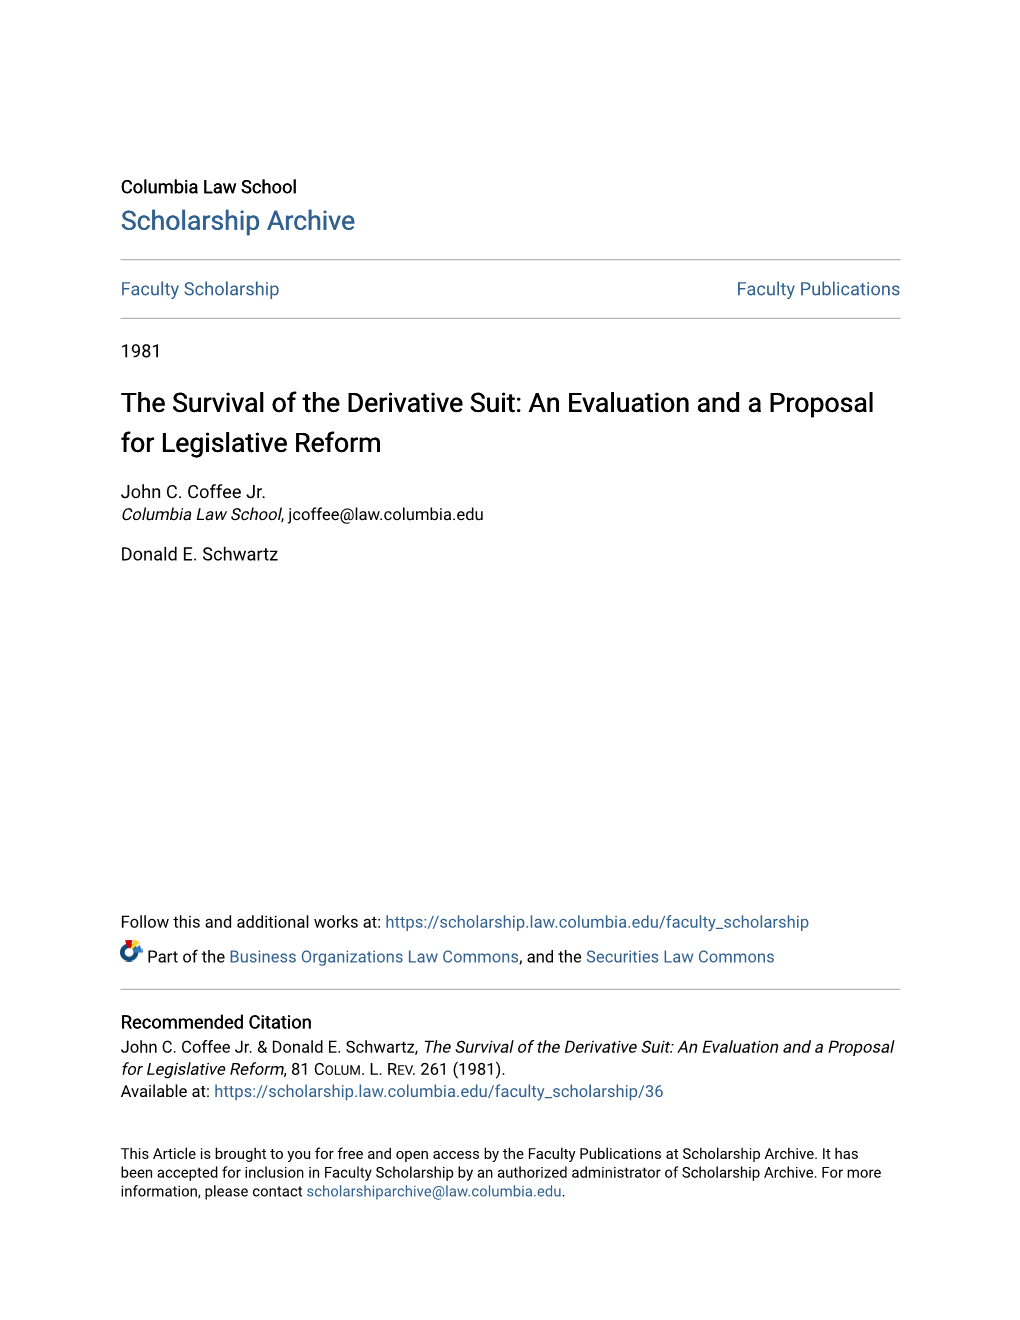 The Survival of the Derivative Suit: an Evaluation and a Proposal for Legislative Reform